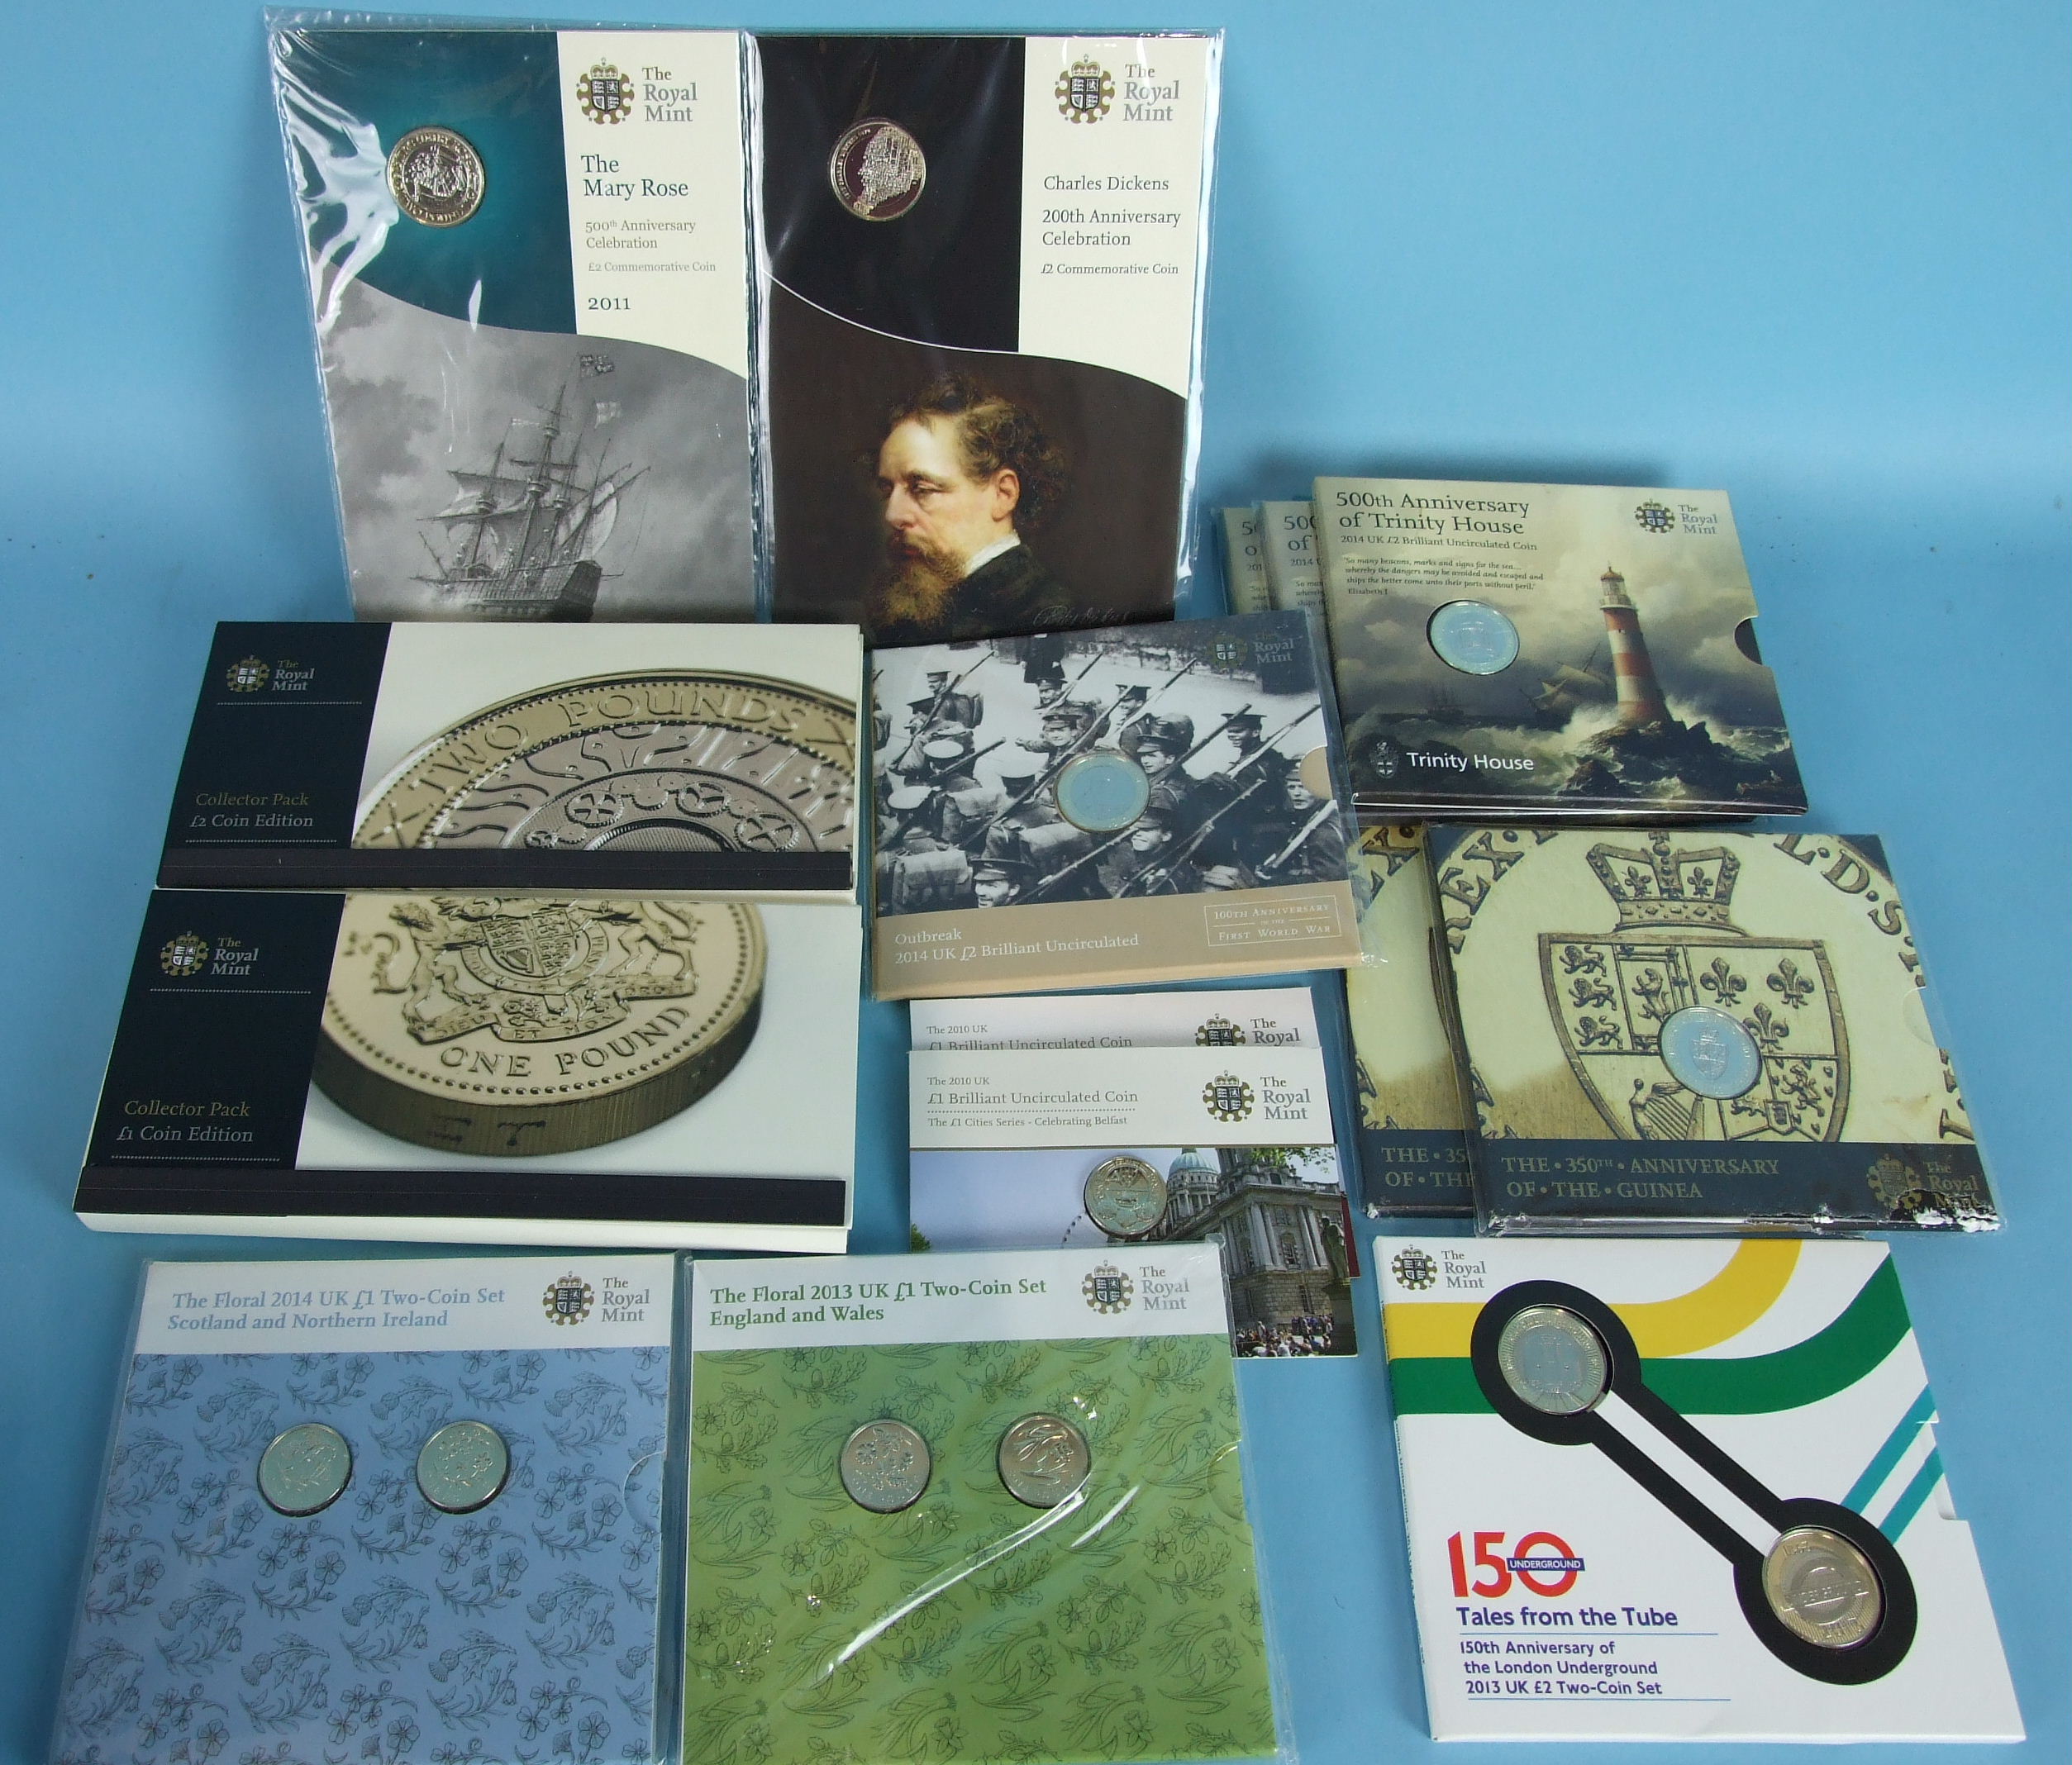 The Royal Mint Collectors Pack of sixteen £2 coins, nine other commemorative £2 coins, the